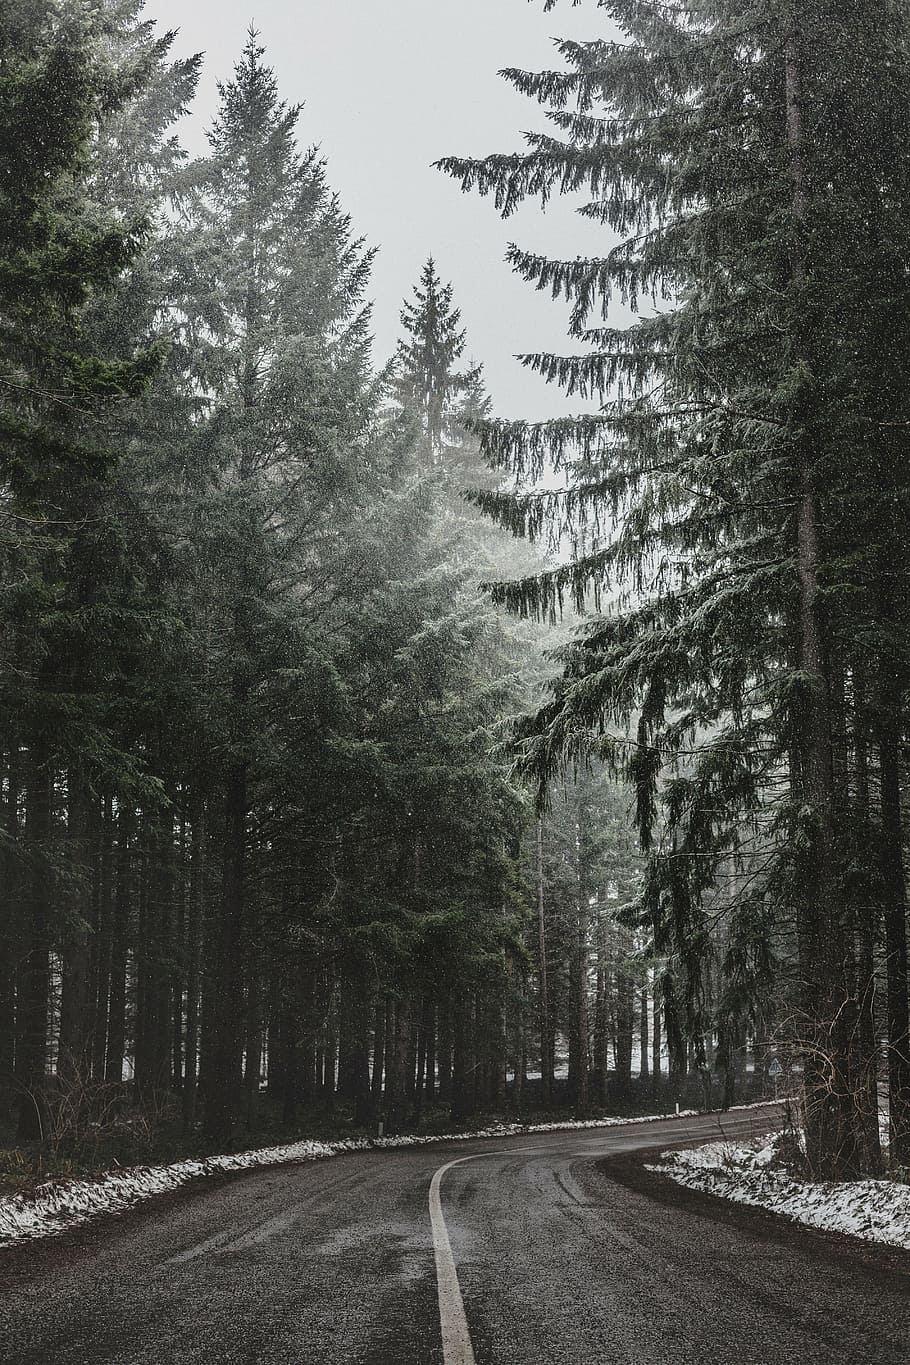 road pavement, surrounded, pine trees, trees, plant, nature, road, travel, black and white, fog